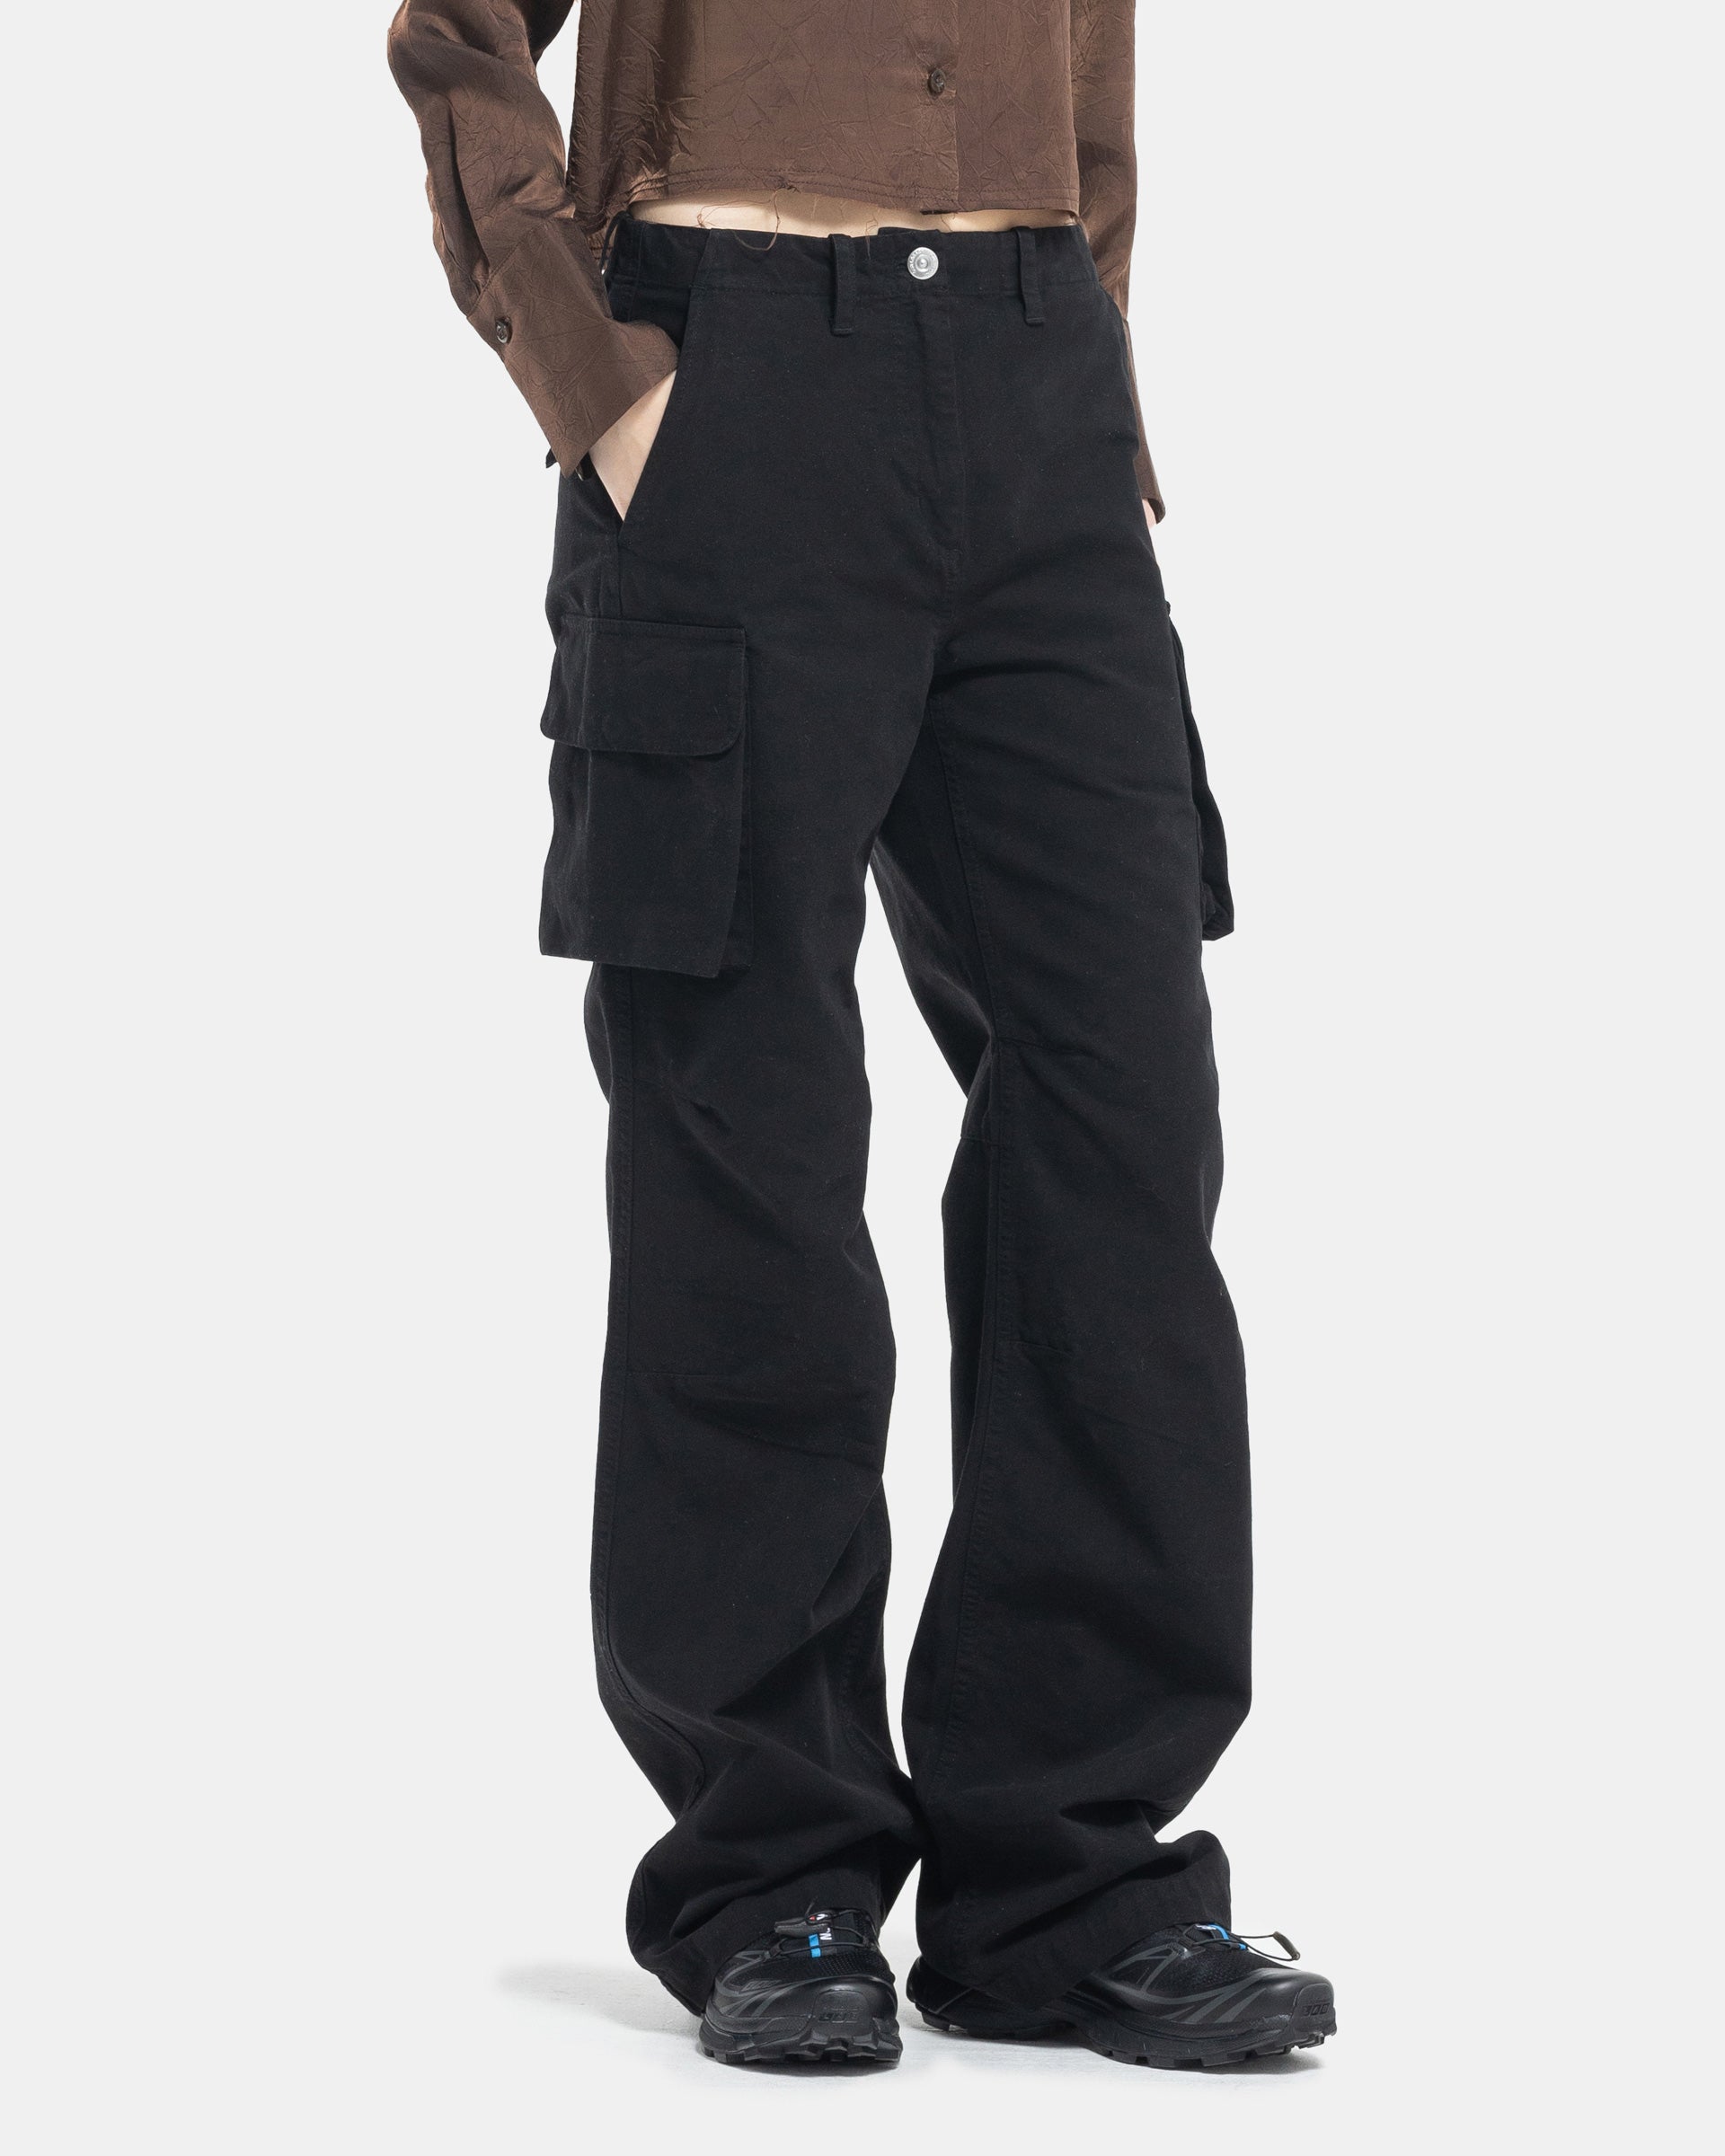 Black Cargo Pants from Our Legacy on white background